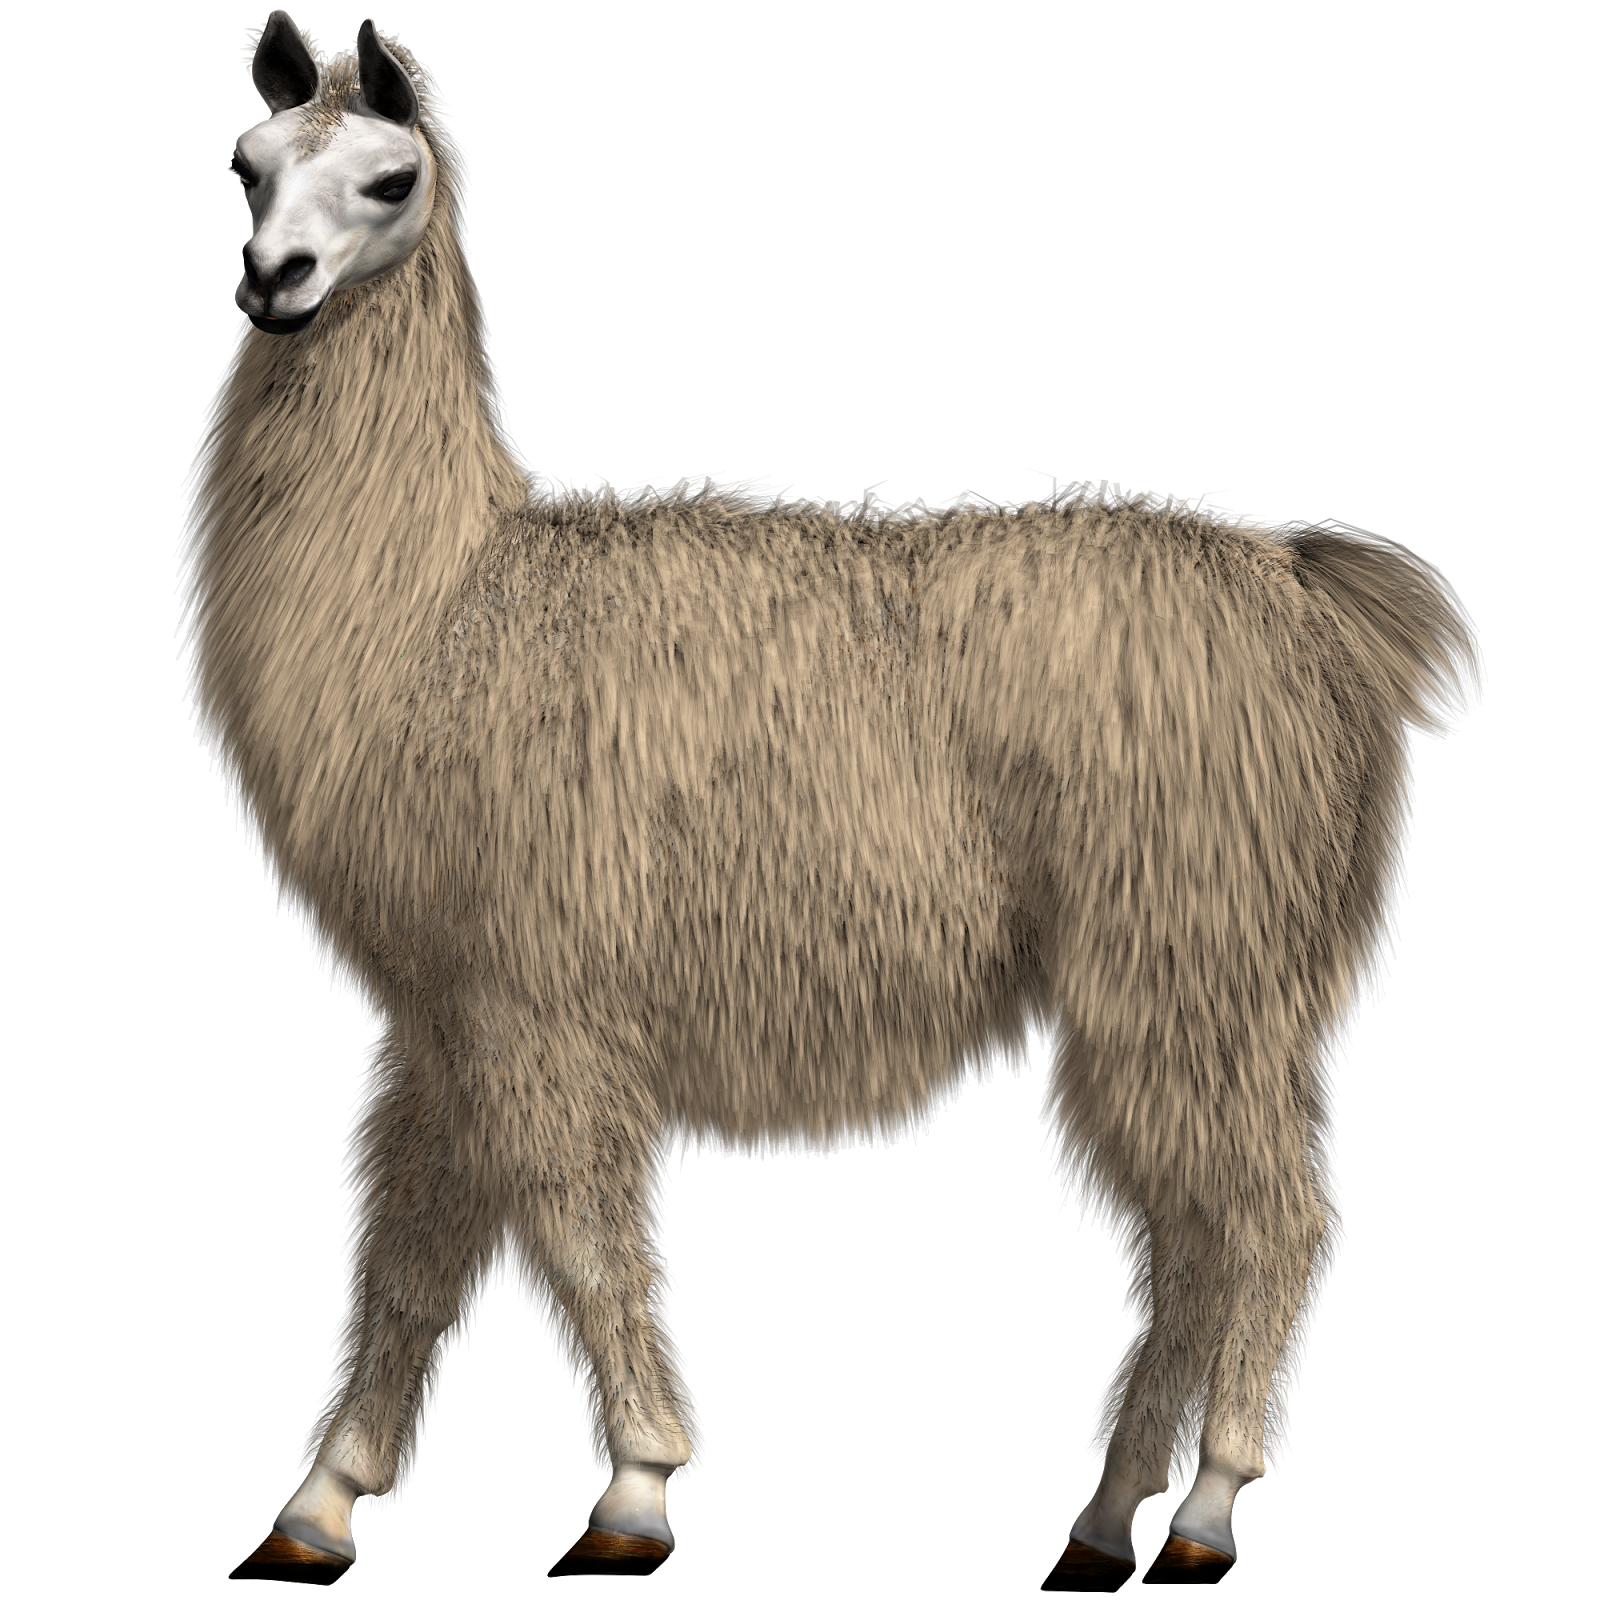 the-secret-files-of-fairday-morrow-answer-to-monday-s-riddle-it-s-a-llama